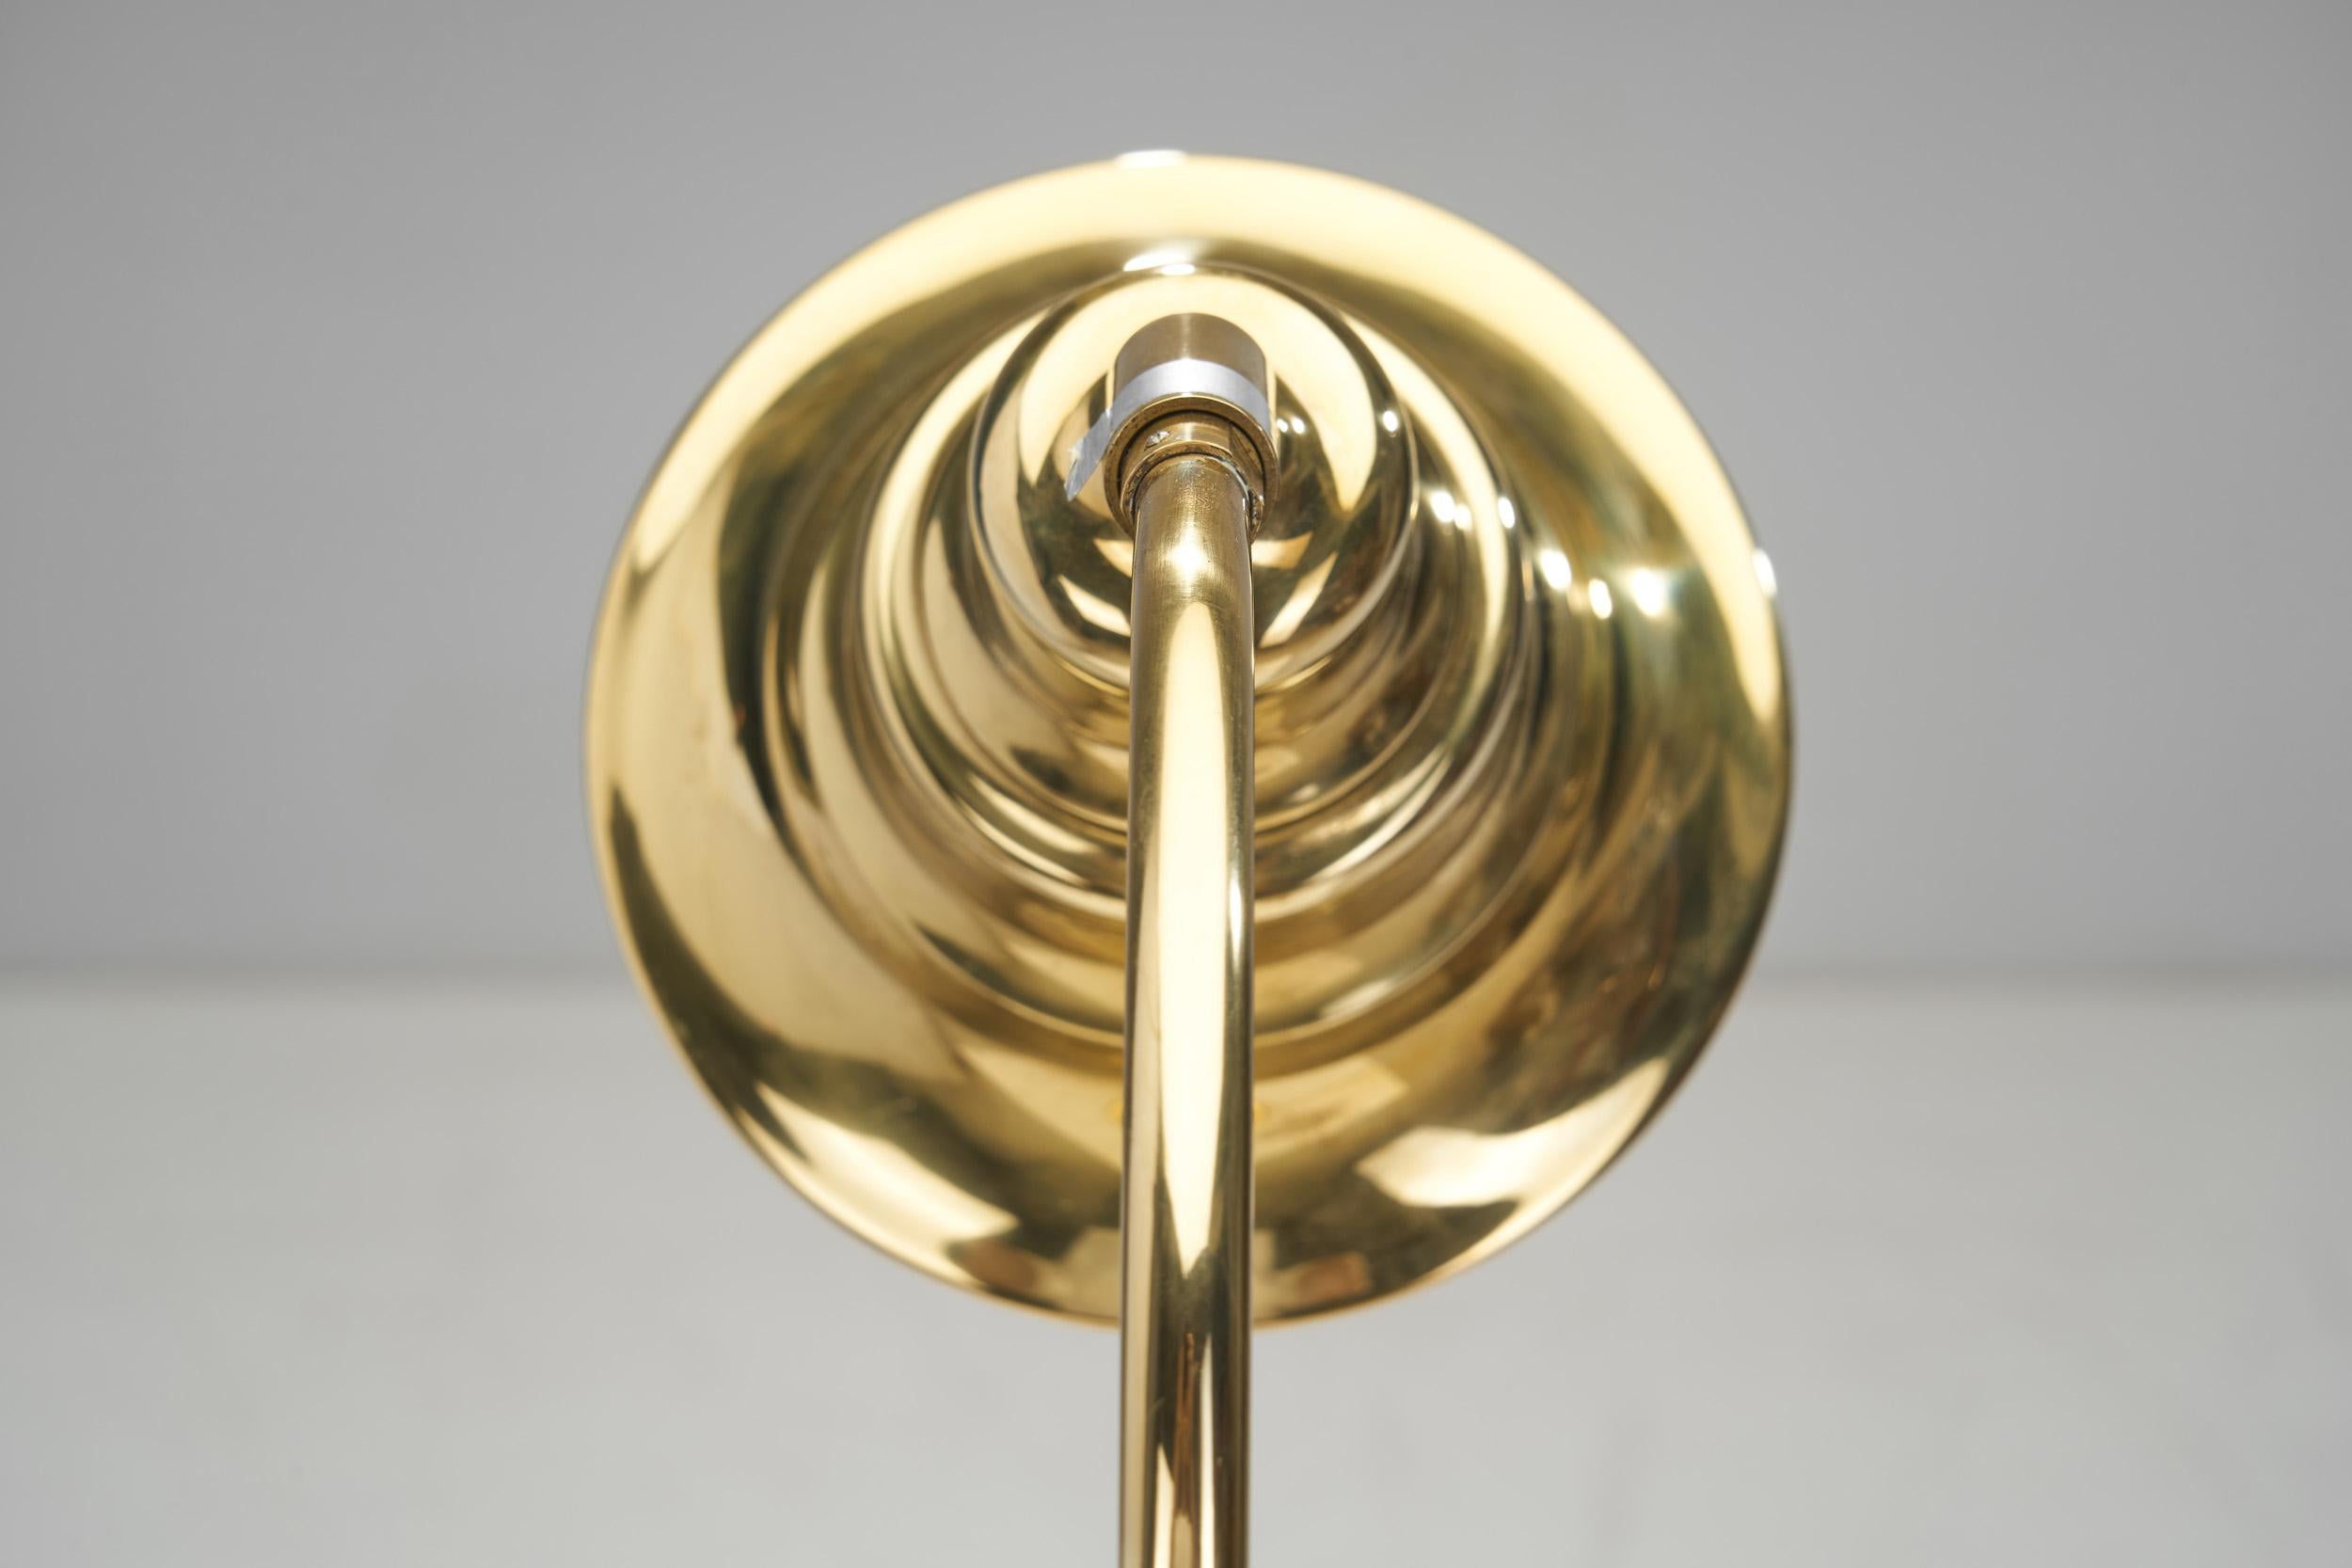 Jan Wickelgren Curved Brass Table Lamp for Aneta Belysning AB, Sweden, 1970s For Sale 6